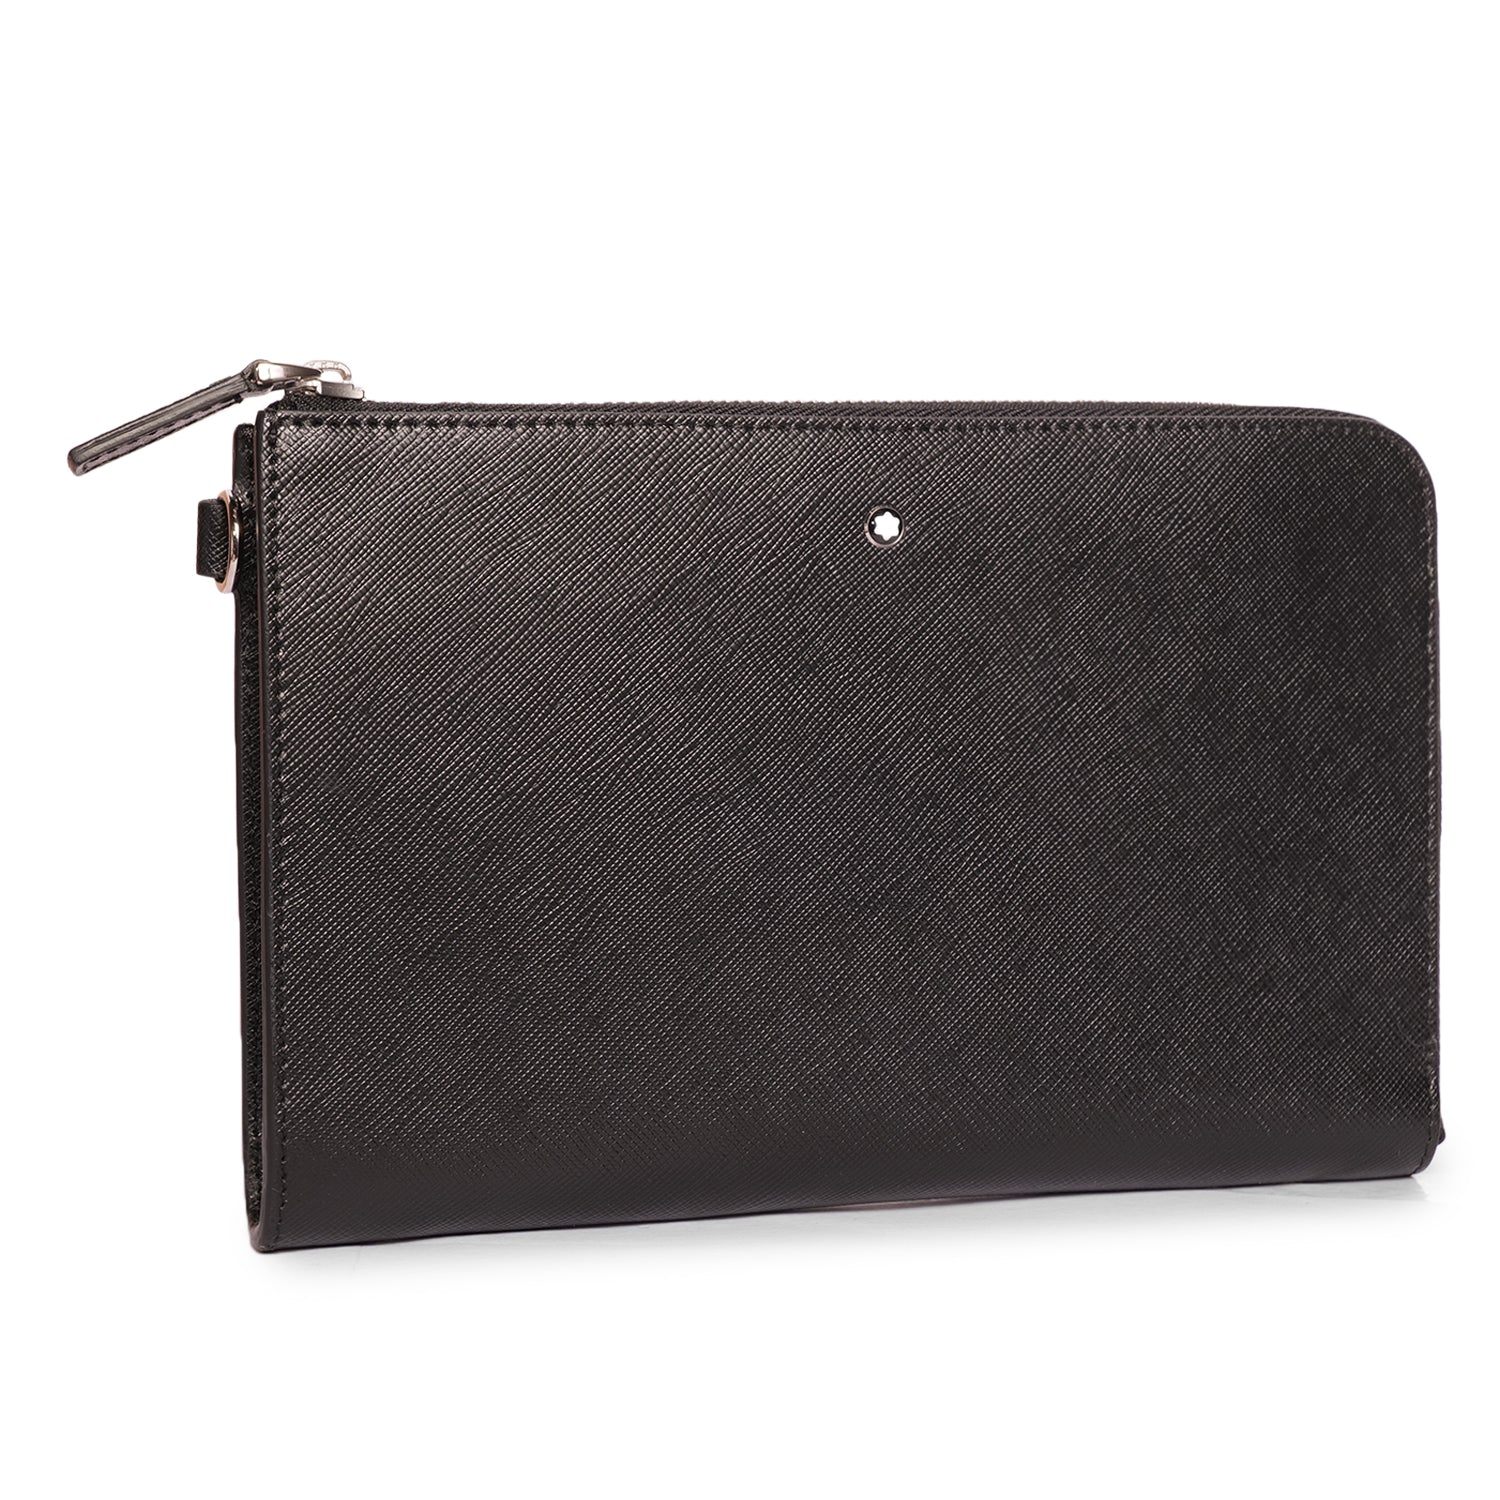 MONT BLANC SMALL POUCH IN BLACK